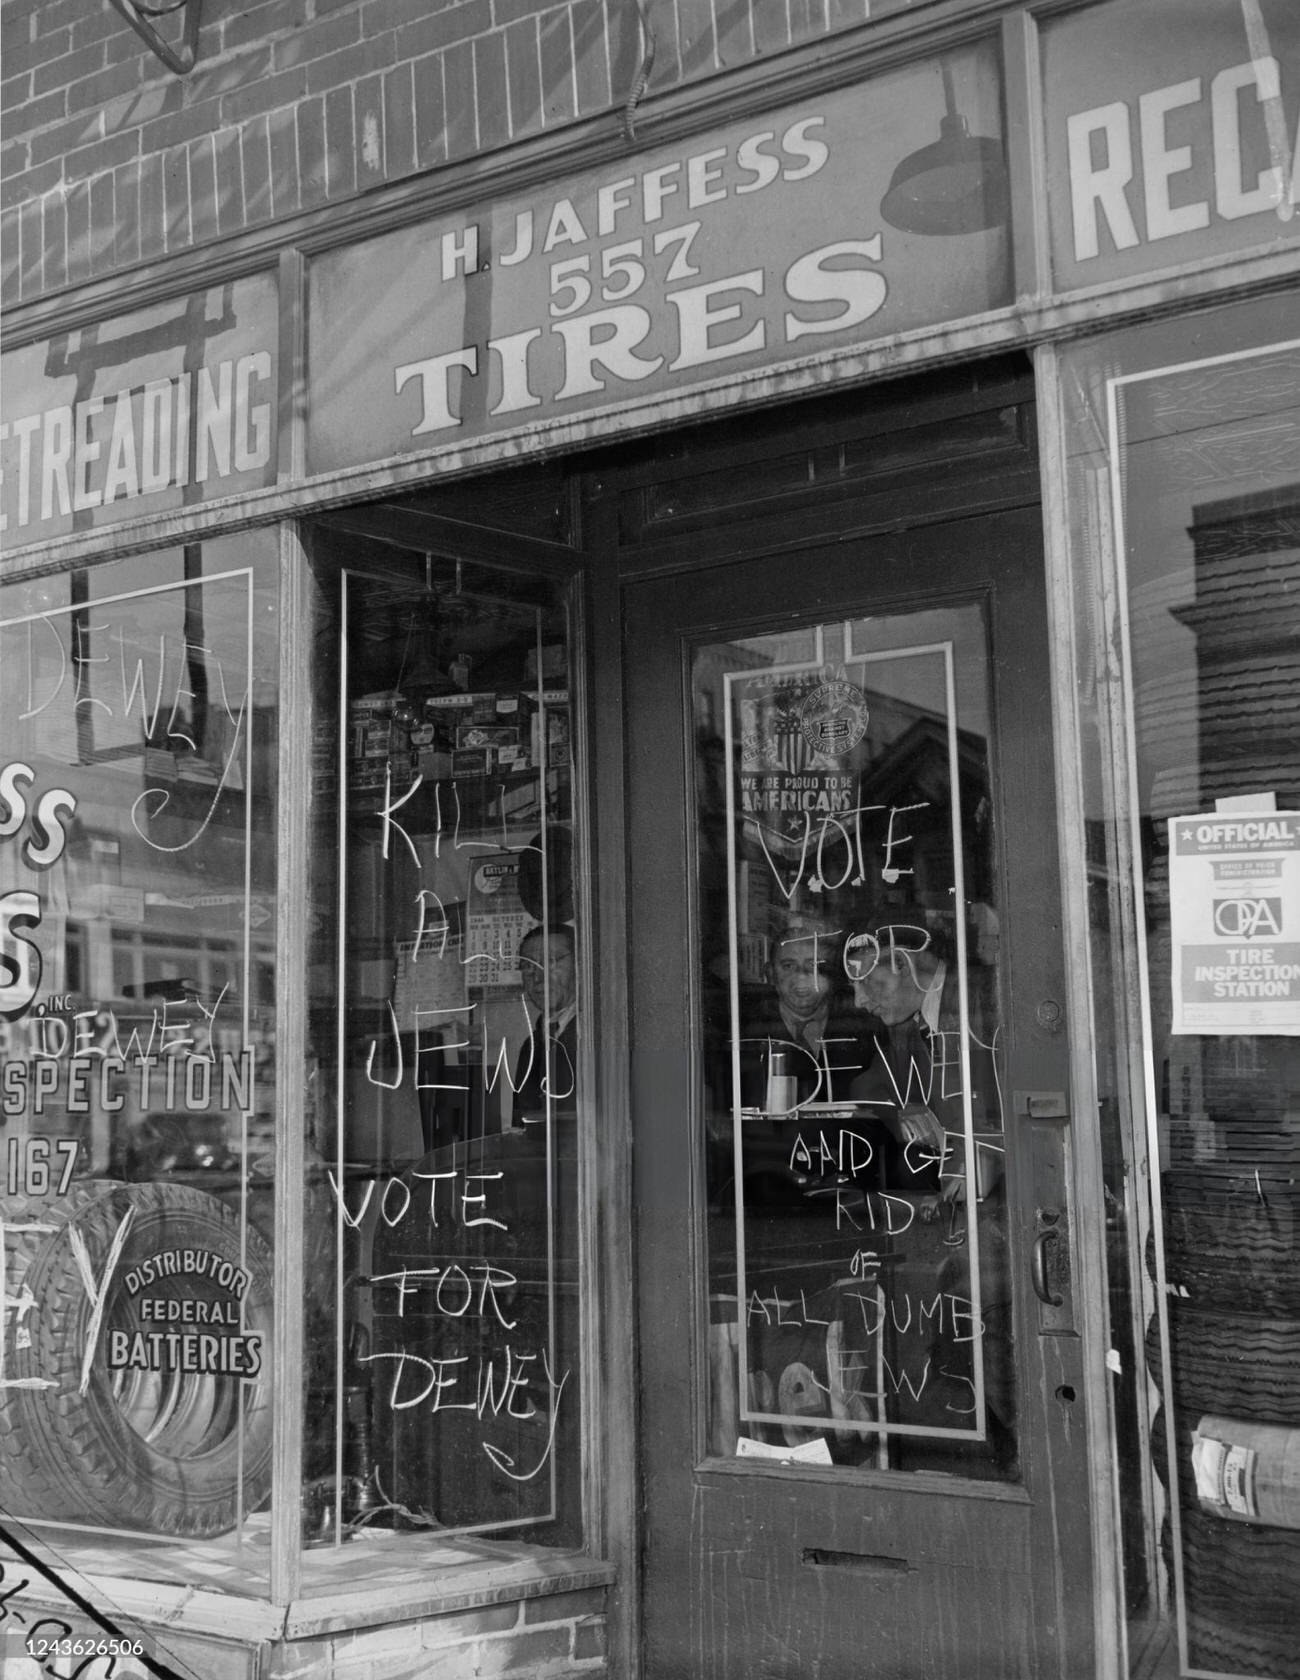 Anti-Semitic Graffiti During The Us Presidential Campaign Of 1944 On The H Jaffess Tire Company Shop In The Bronx.